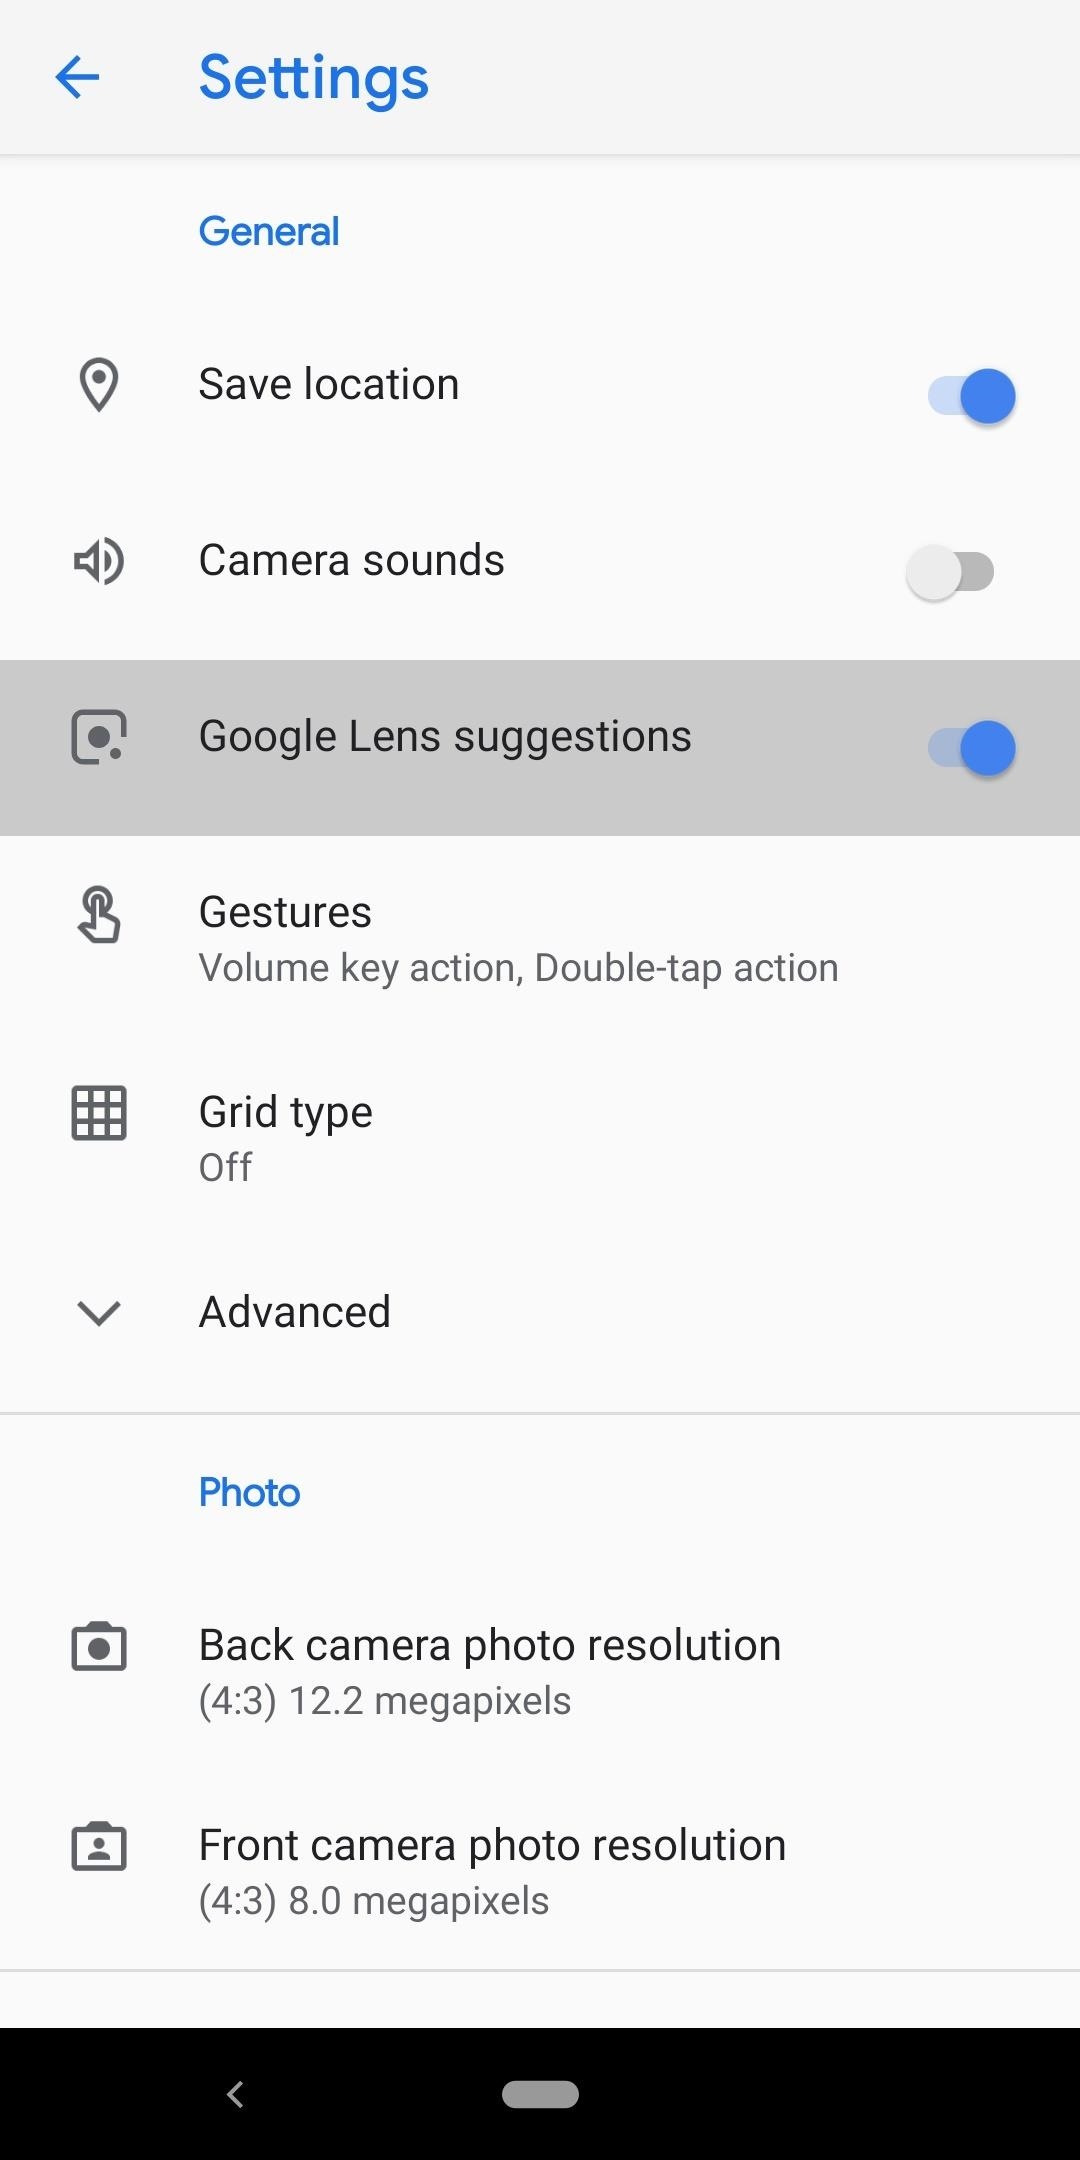 How to Scan QR Codes in Your Pixel's Camera App